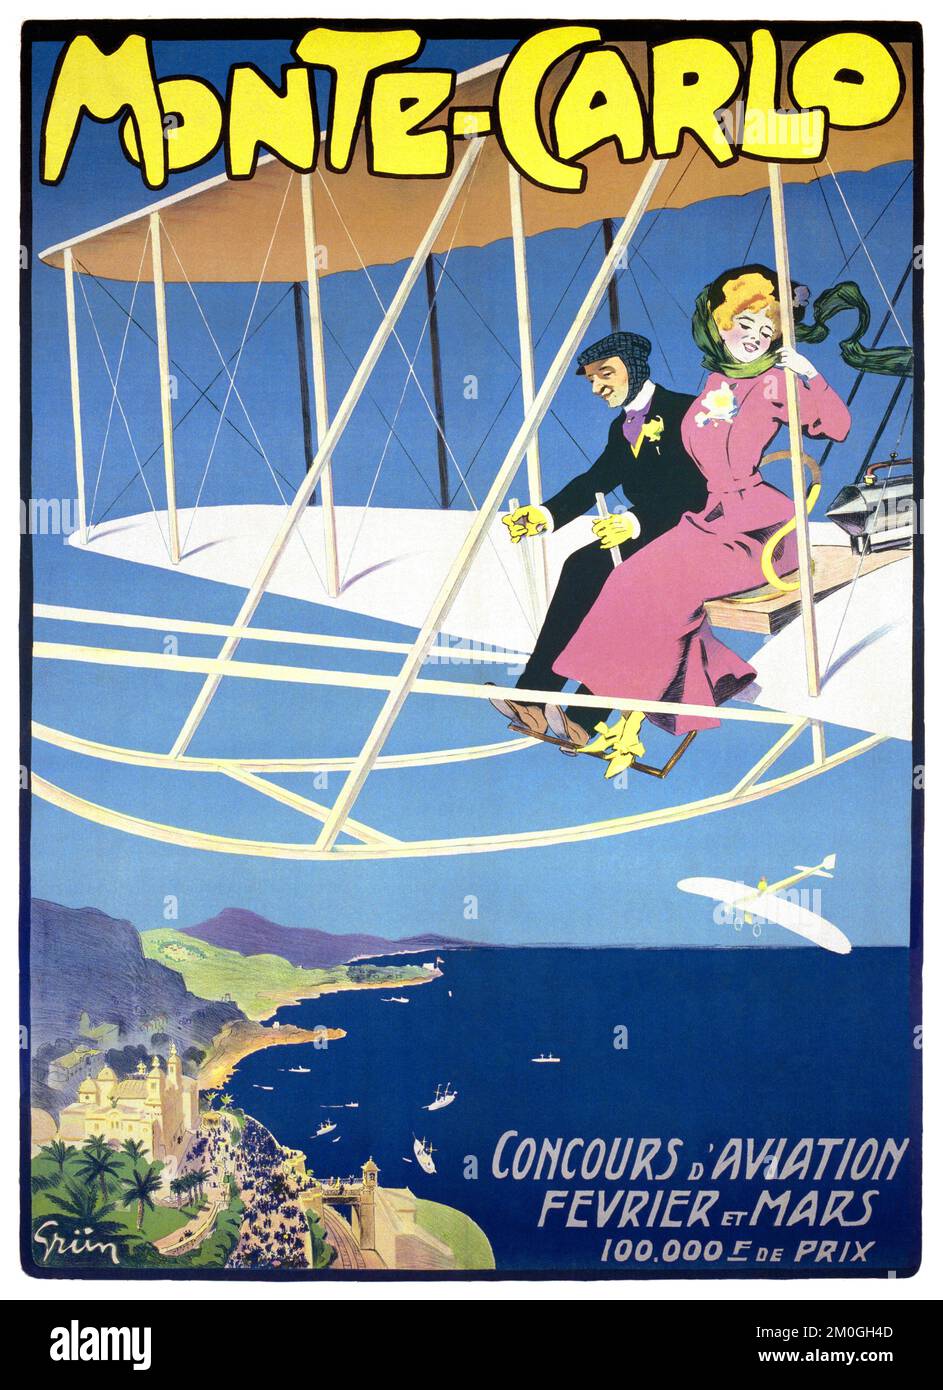 Monte Carlo concours d’aviation. Février-Mars 1909 by Jules Alexandre Grün (1868-1934). Poster published in 1909 in France. Stock Photo